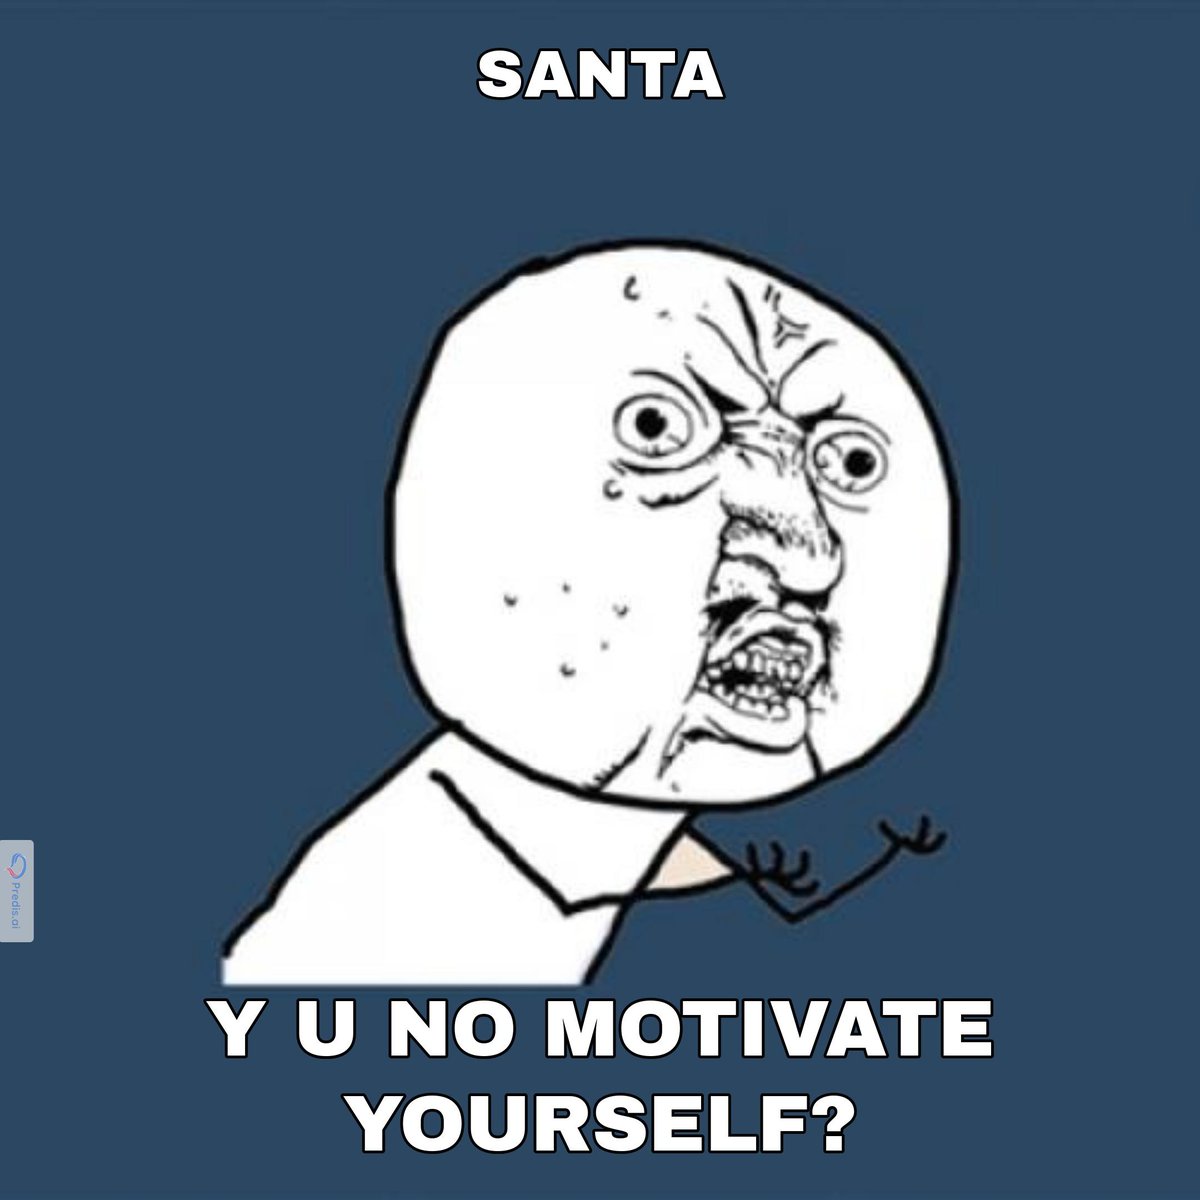 Just asked Santa for a motivation boost. He said, 'I'm good, but I'm not that good.' 😂 #LazyPeoplePain #SantaSaysNo